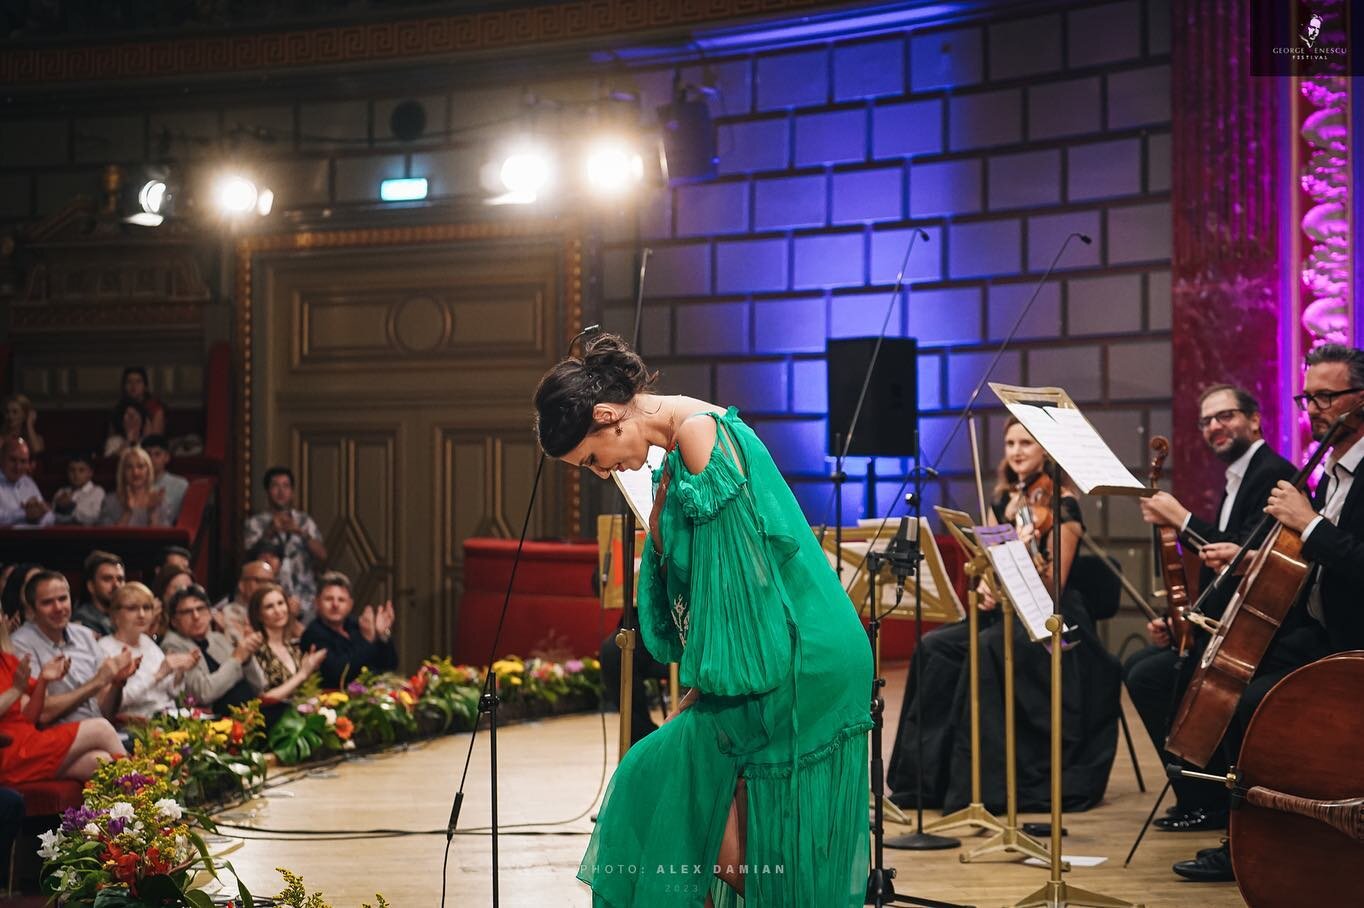 Some impressions from that only night at the Romanian Atheneum for the @enescu_festival . Thank you everyone! Va multumesc si ma &icirc;nchin! 

&ldquo;The international recognition she enjoys says everything about the artistic act she can produce. I